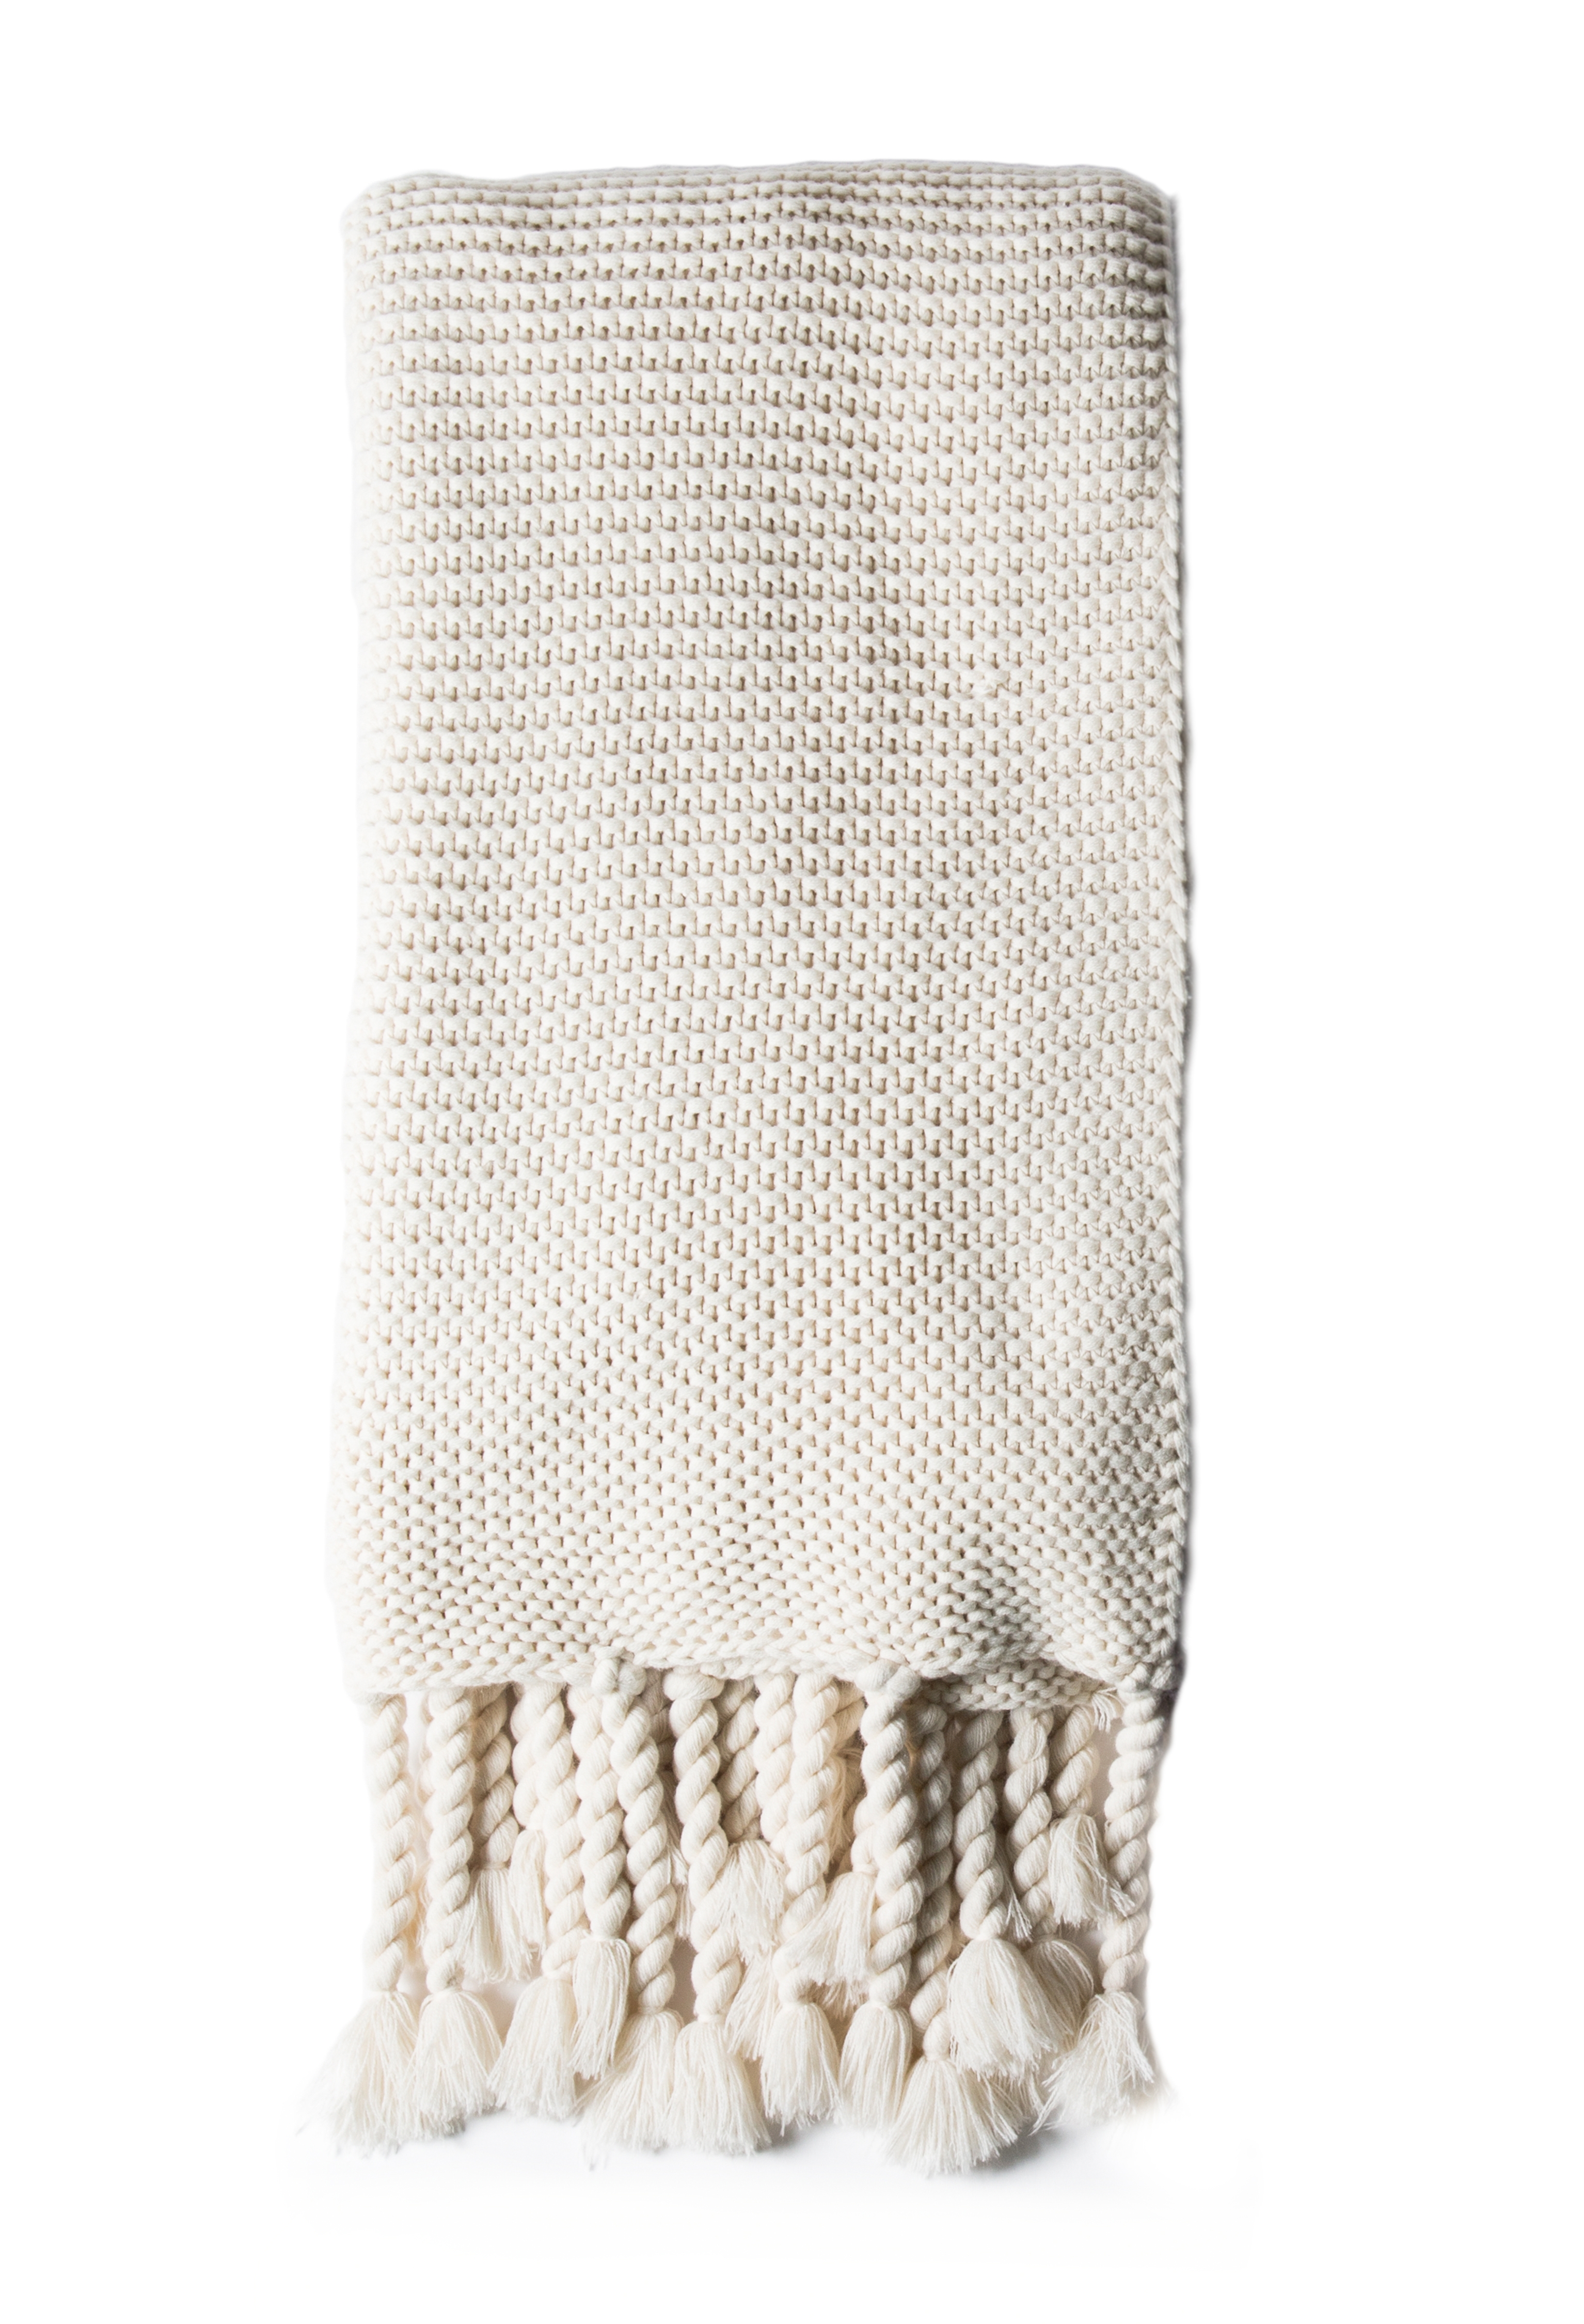 Trestles Chunky Knit Throw by Pom Pom at Home - Image 1